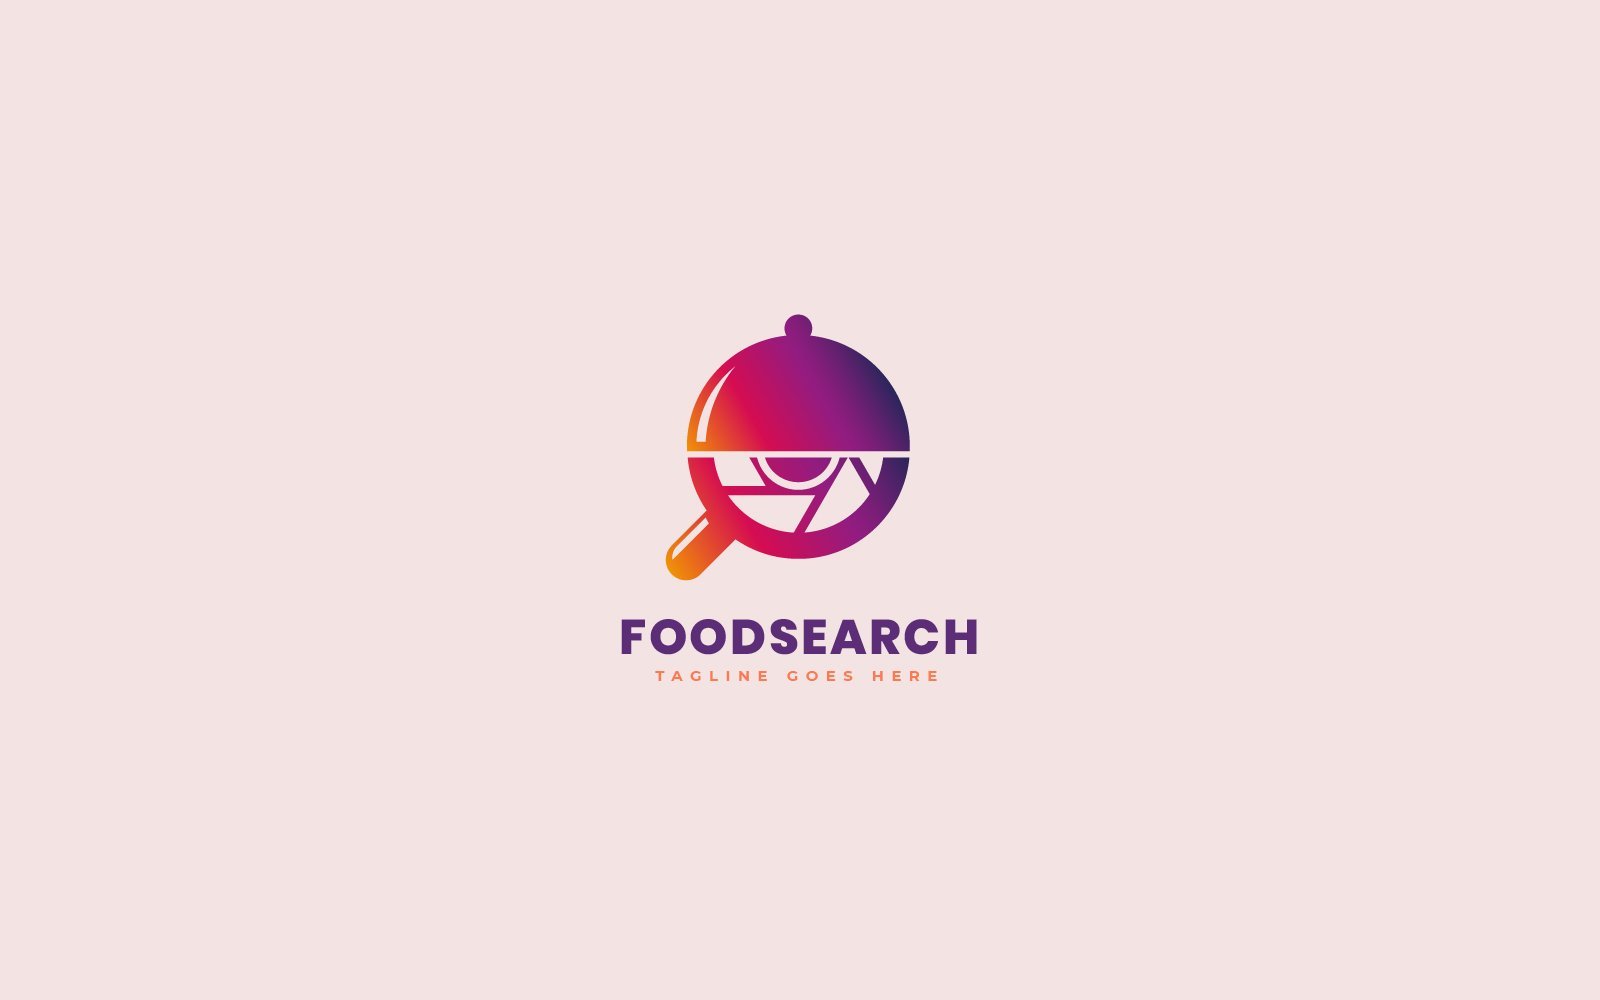 Template #192789 Search Food Webdesign Template - Logo template Preview